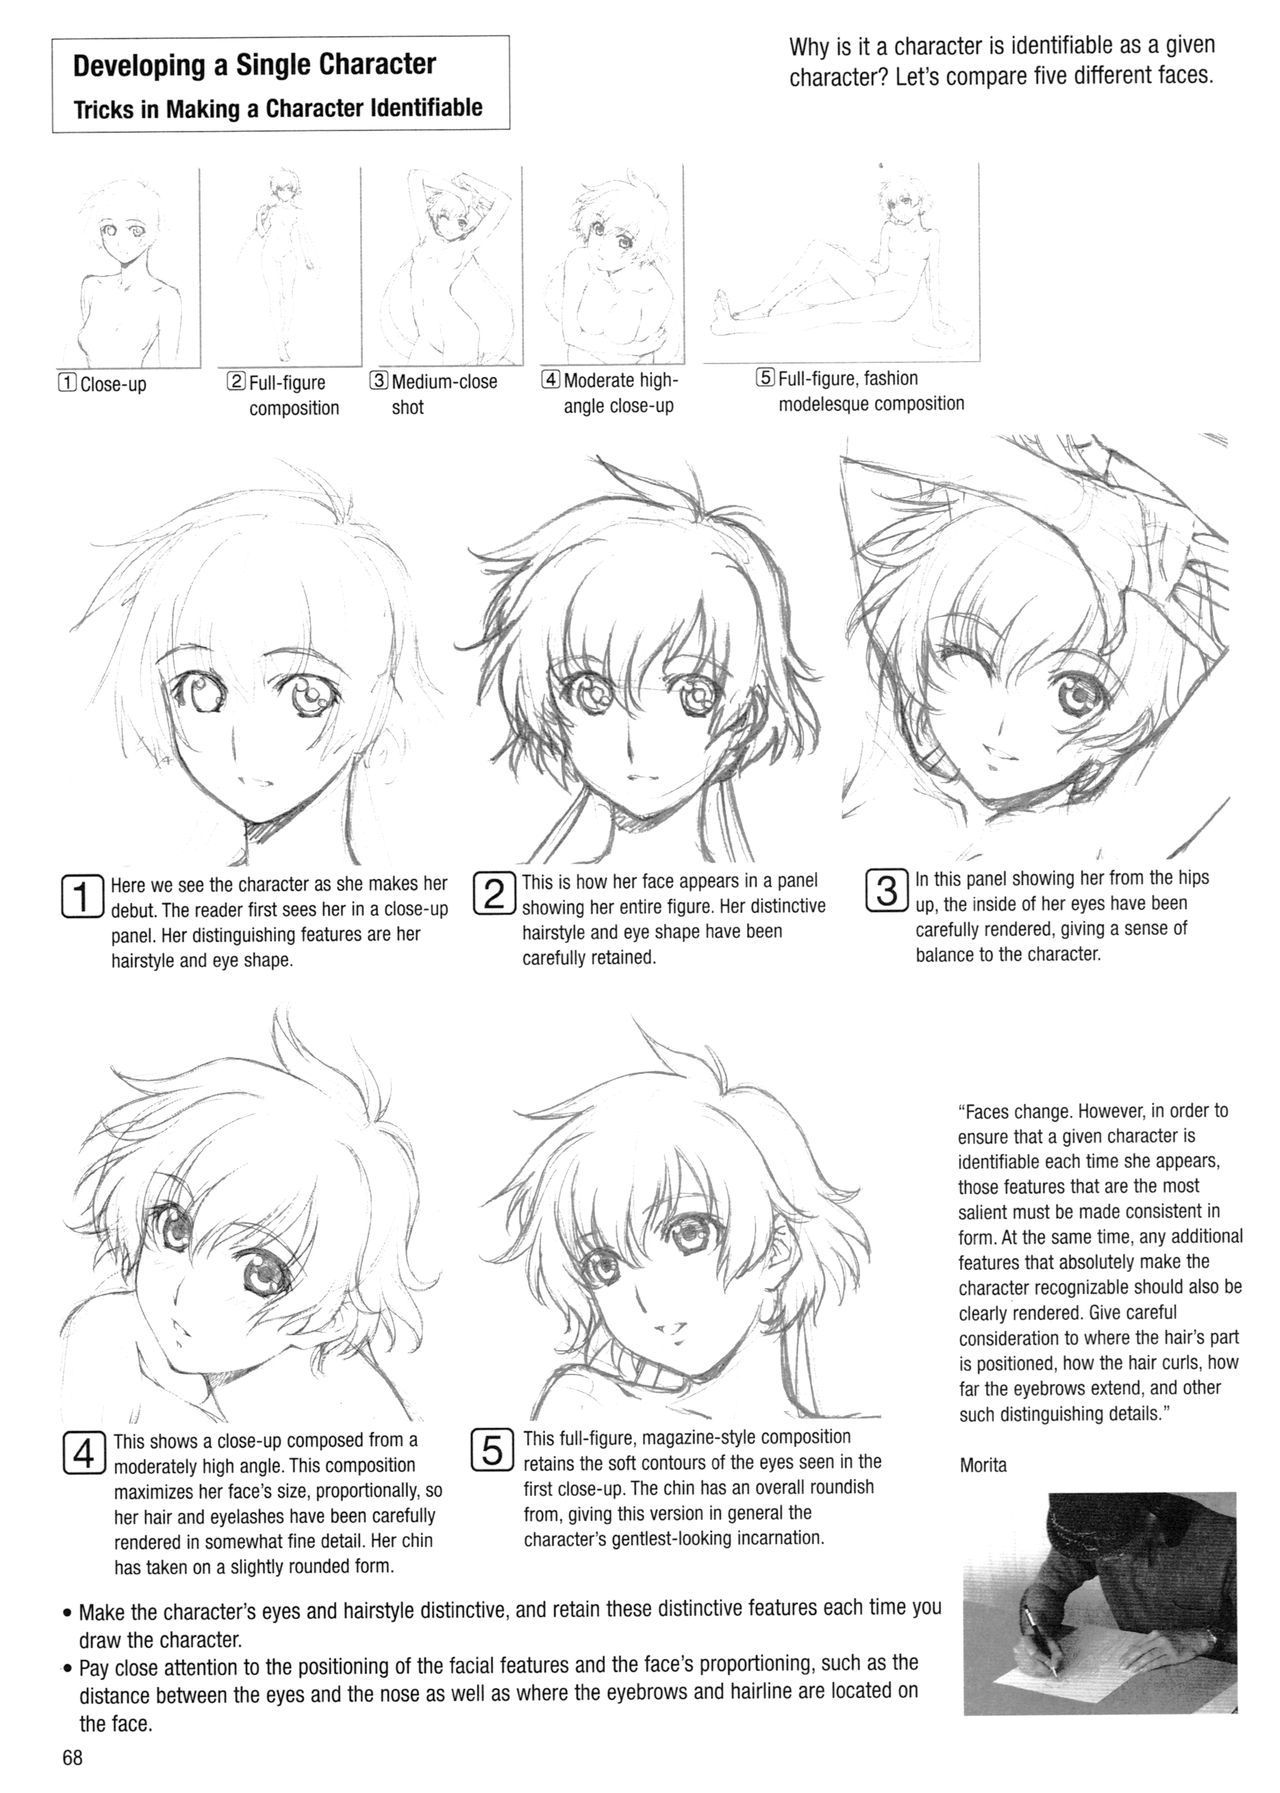 Sketching Manga-Style Vol. 3 - Unforgettable Characters 67